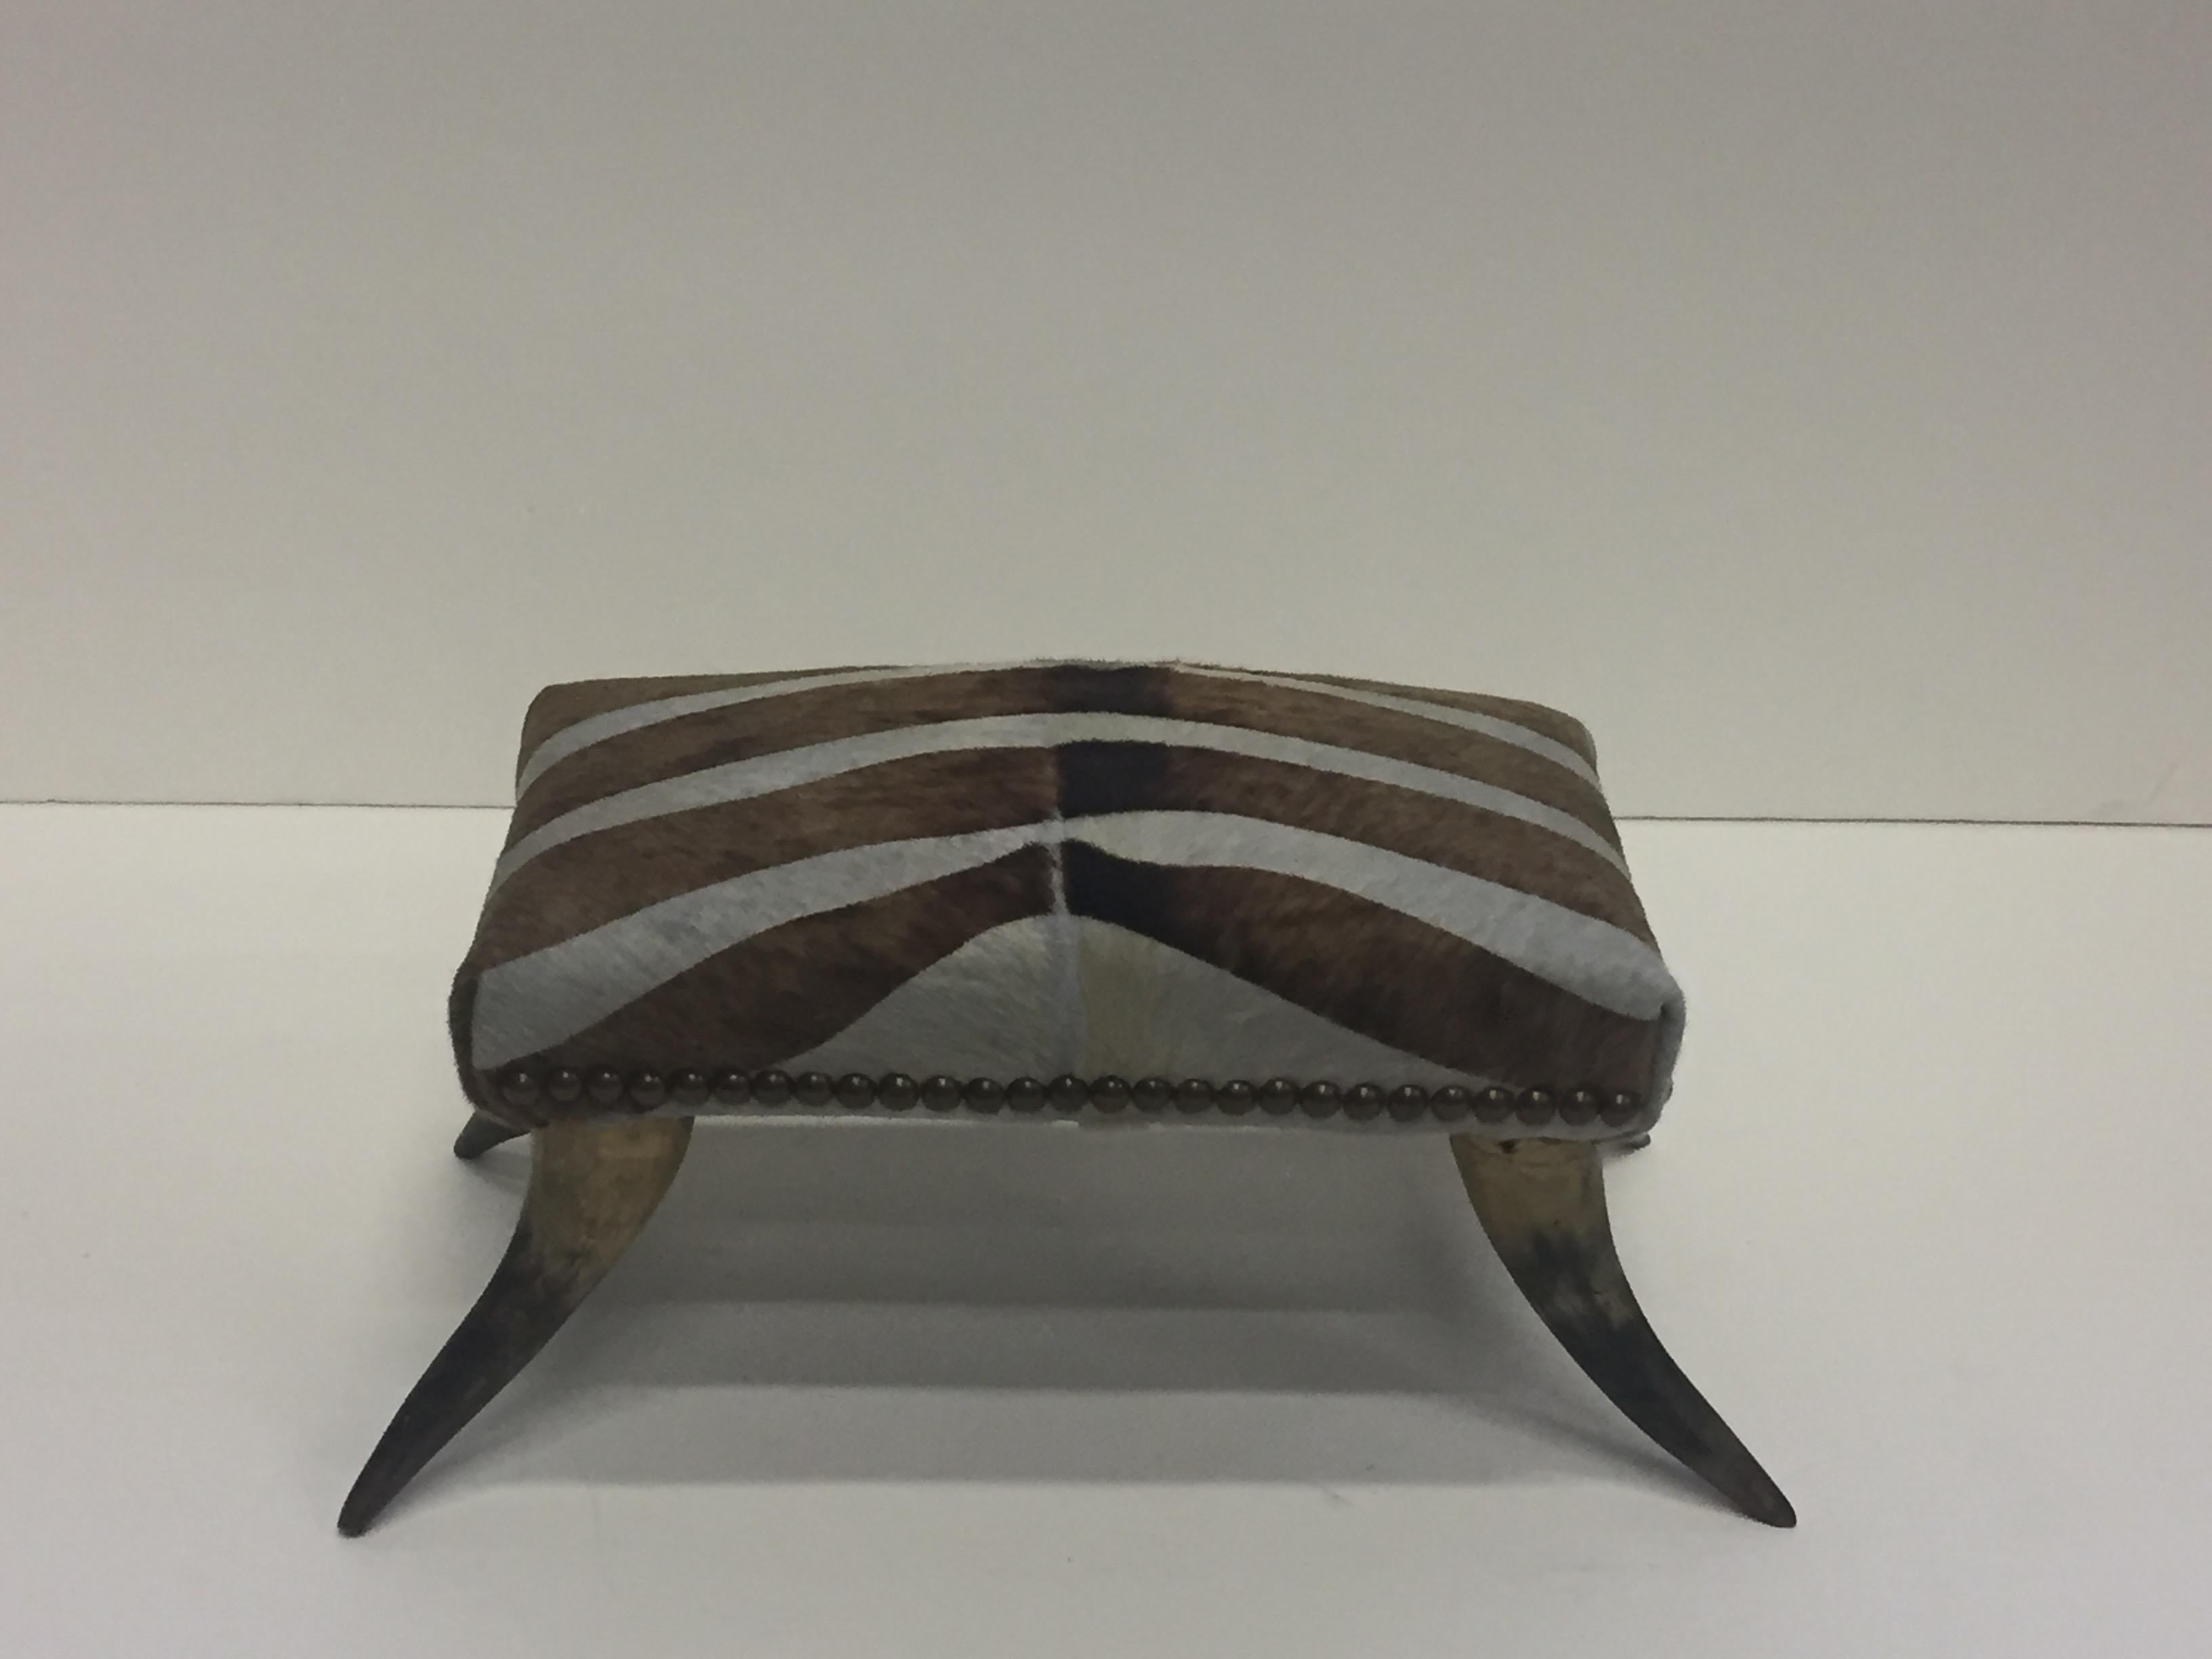 A wonderful and functional Victorian footstool from the late 19th century having
authentic horn feet and new upholstery in brown and white cowhide zebra stripe.